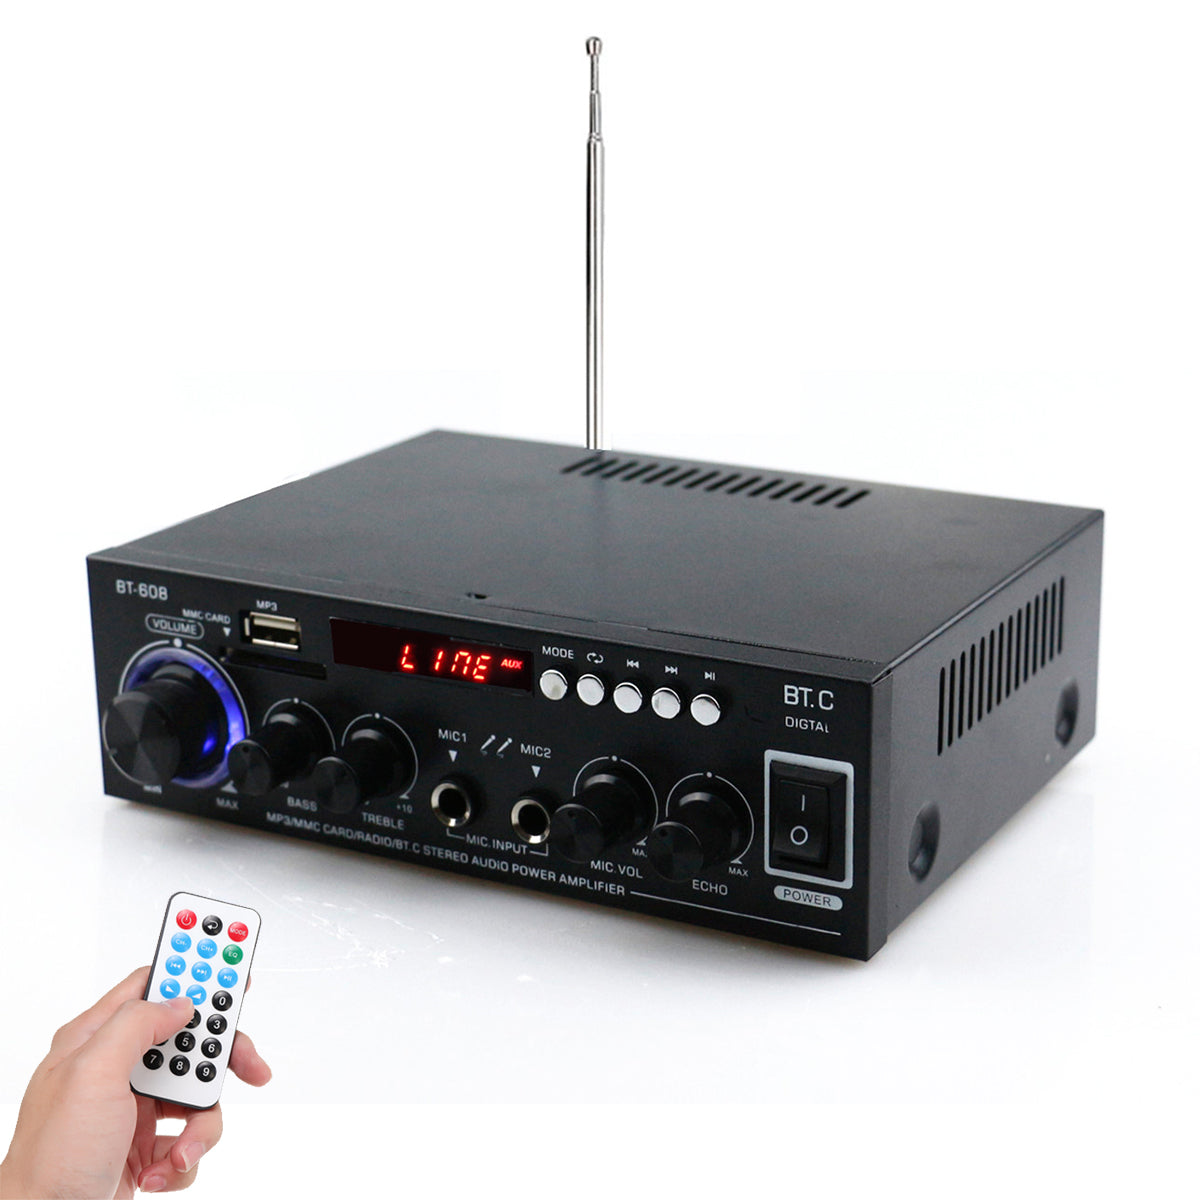 110V/220V Car FM Radio TF Card Audio LED Light Home Sound Amplifier bluetooth Theater HiFi Stereo Speakers Support - Auto GoShop